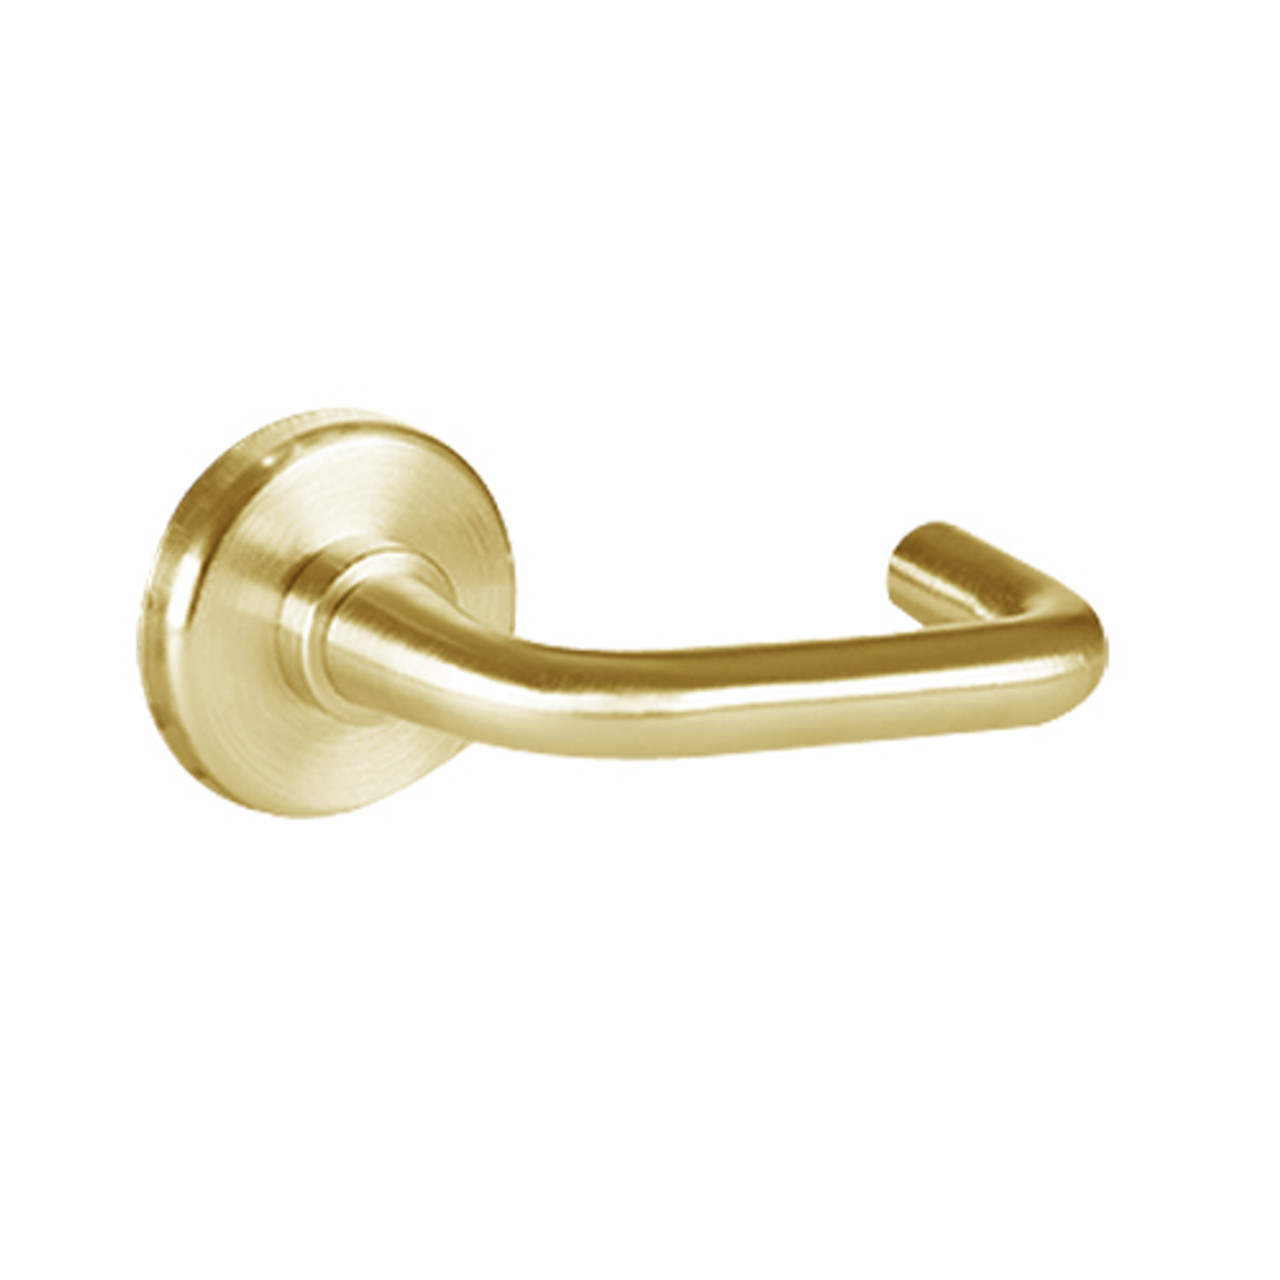 40HTKOS23S606 Best 40H Series Trim Kits Outside Lever w/ Cylinder with Solid Tube-Return Trim Style in Satin Brass